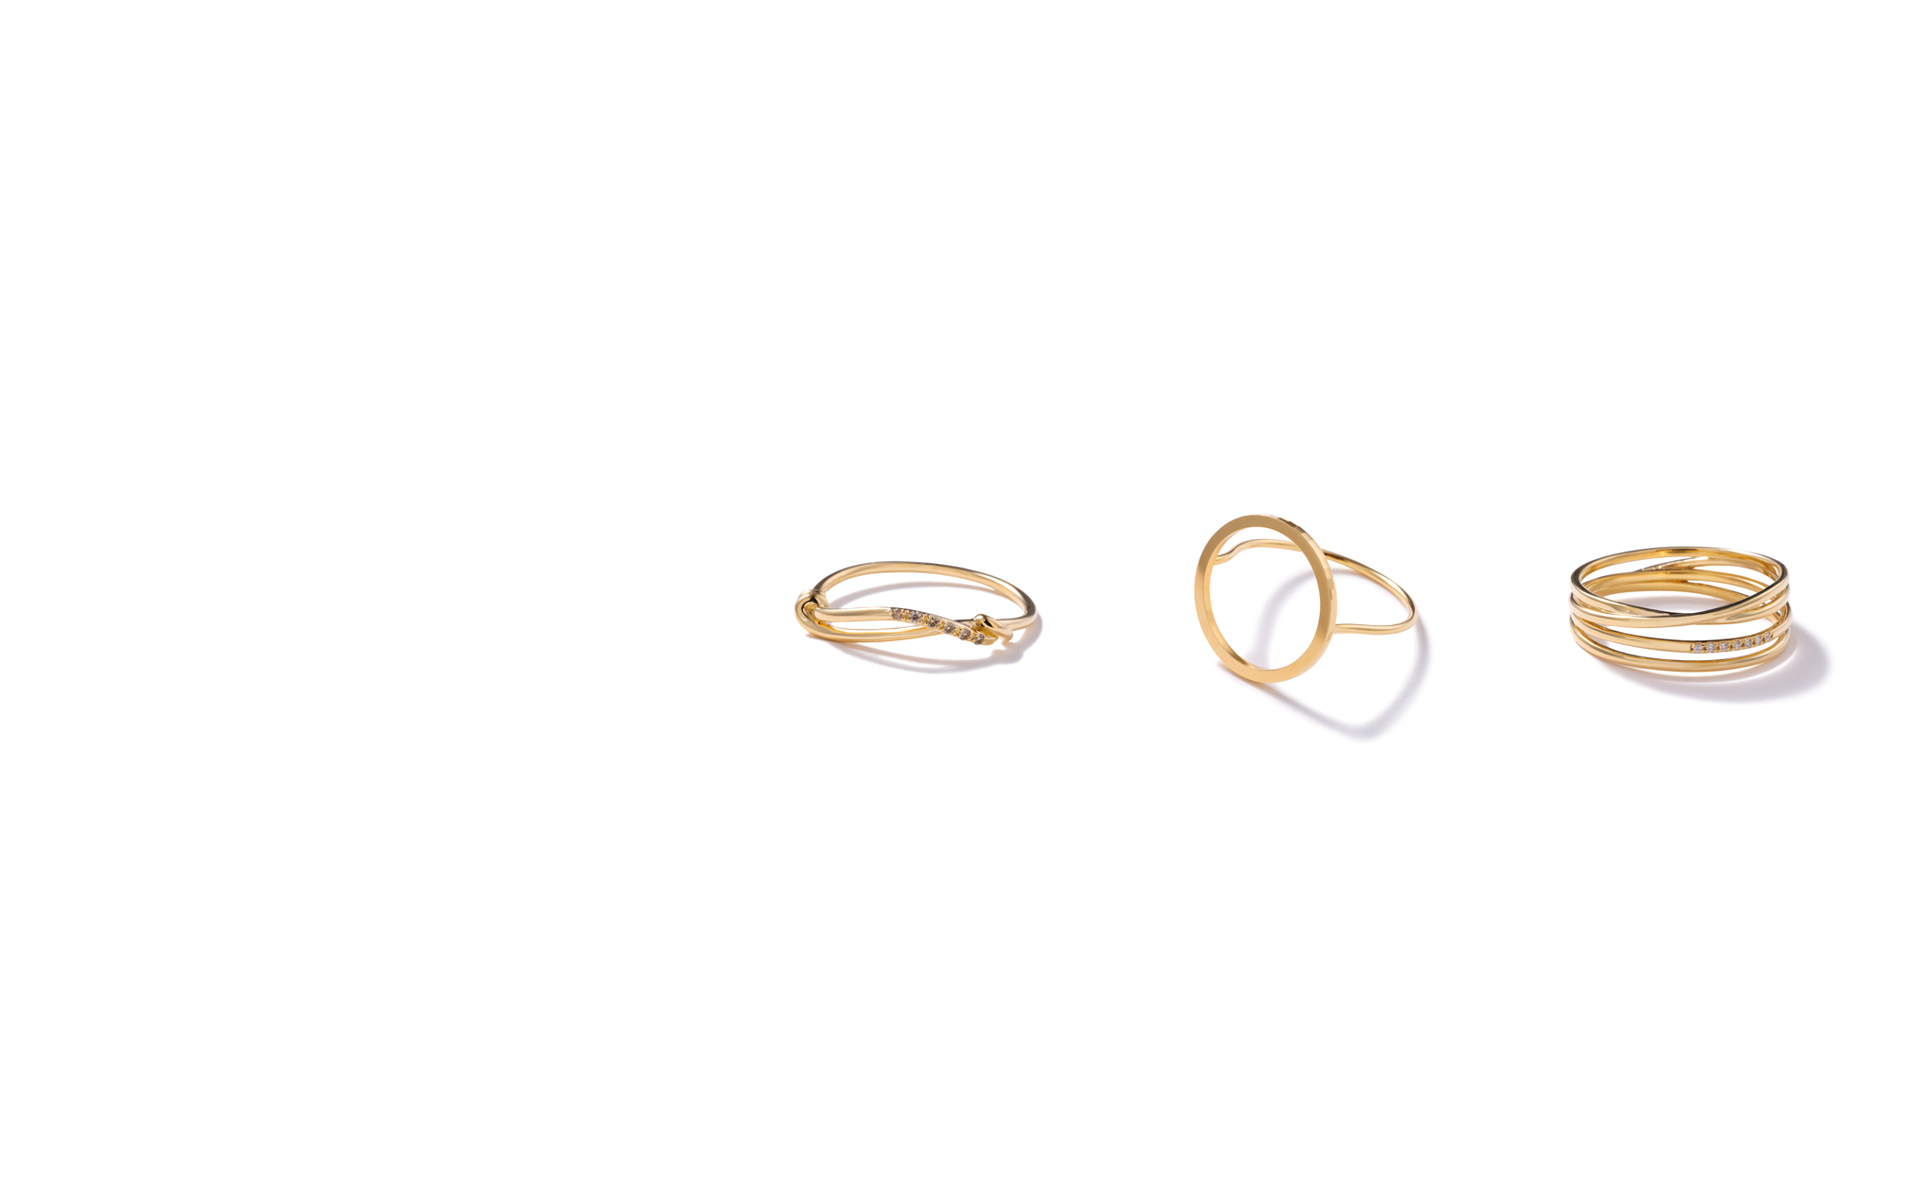 Iconic Rings to Spice Up Your New Look